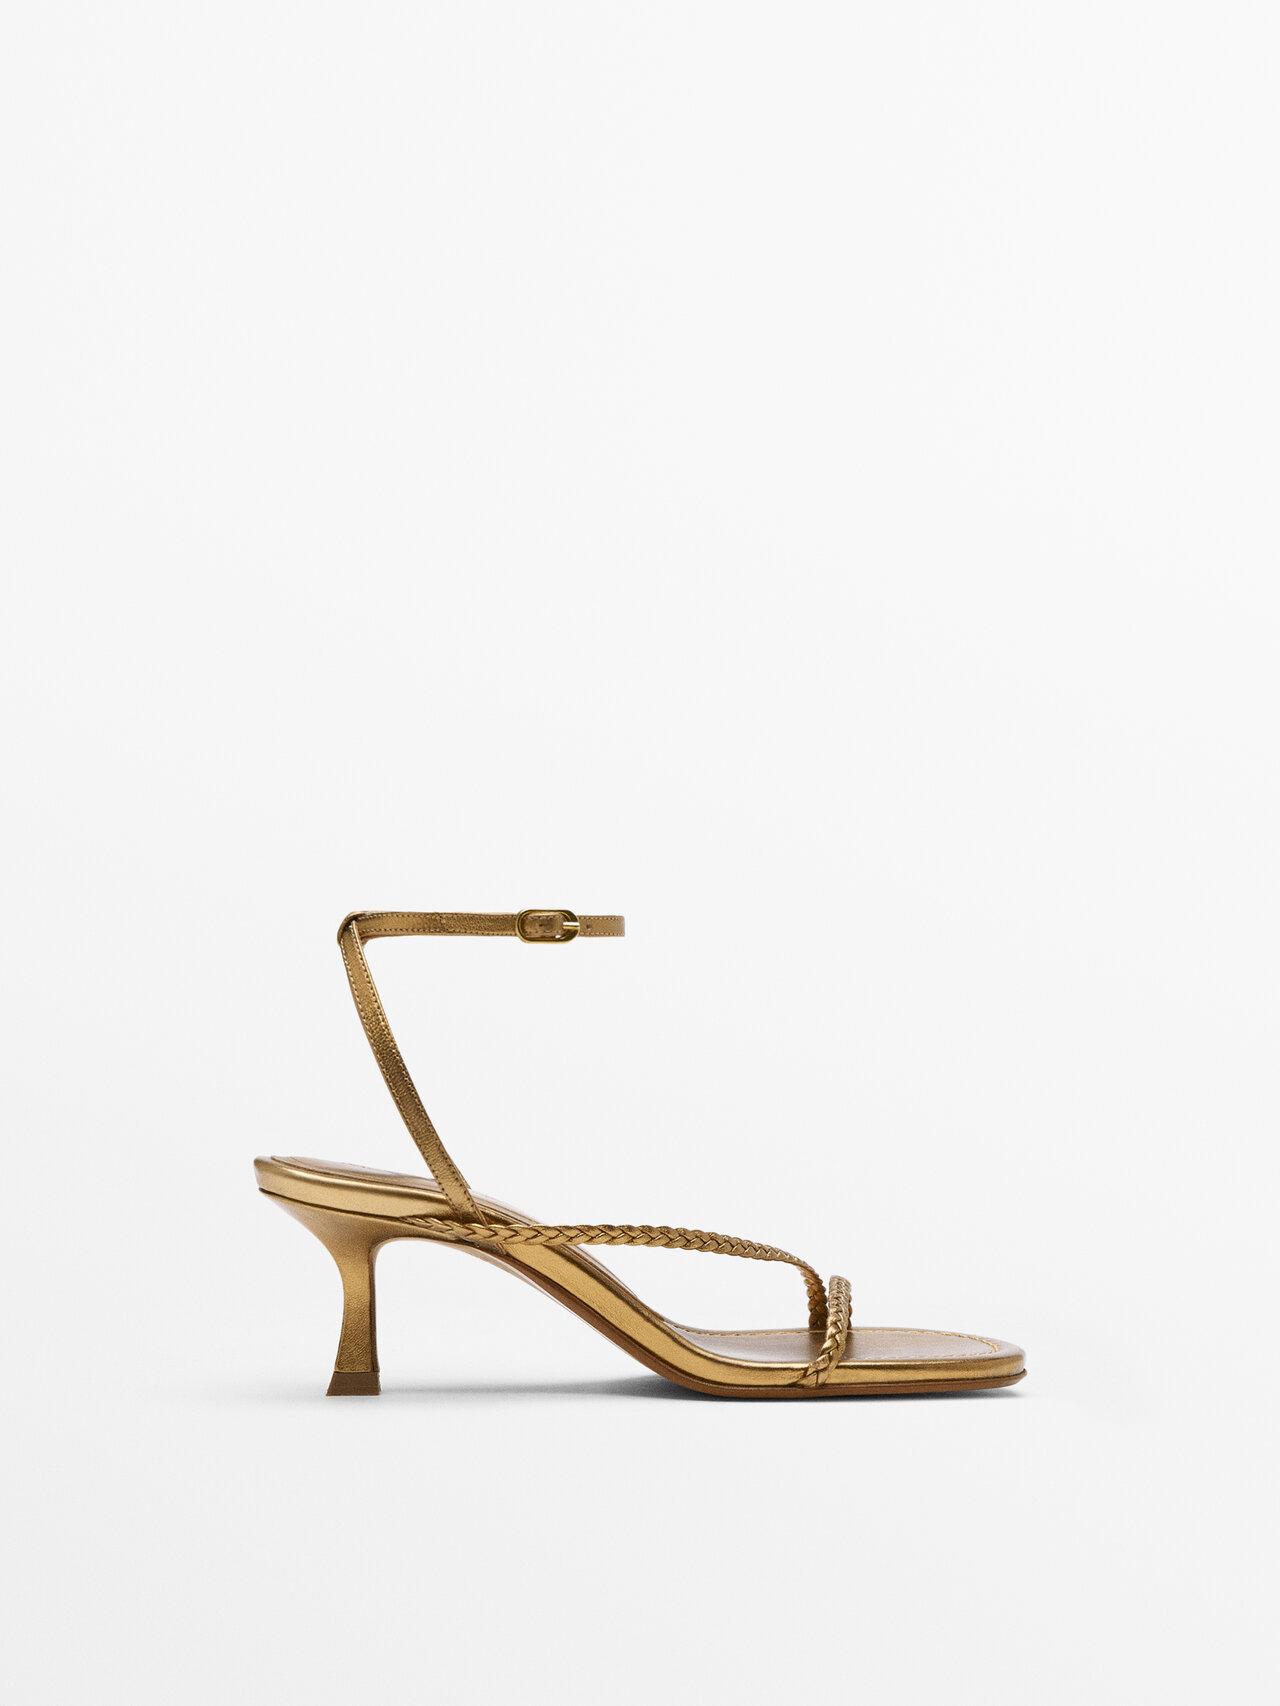 MASSIMO DUTTI Mid-heel Leather Sandals With Plaited Straps in Metallic |  Lyst